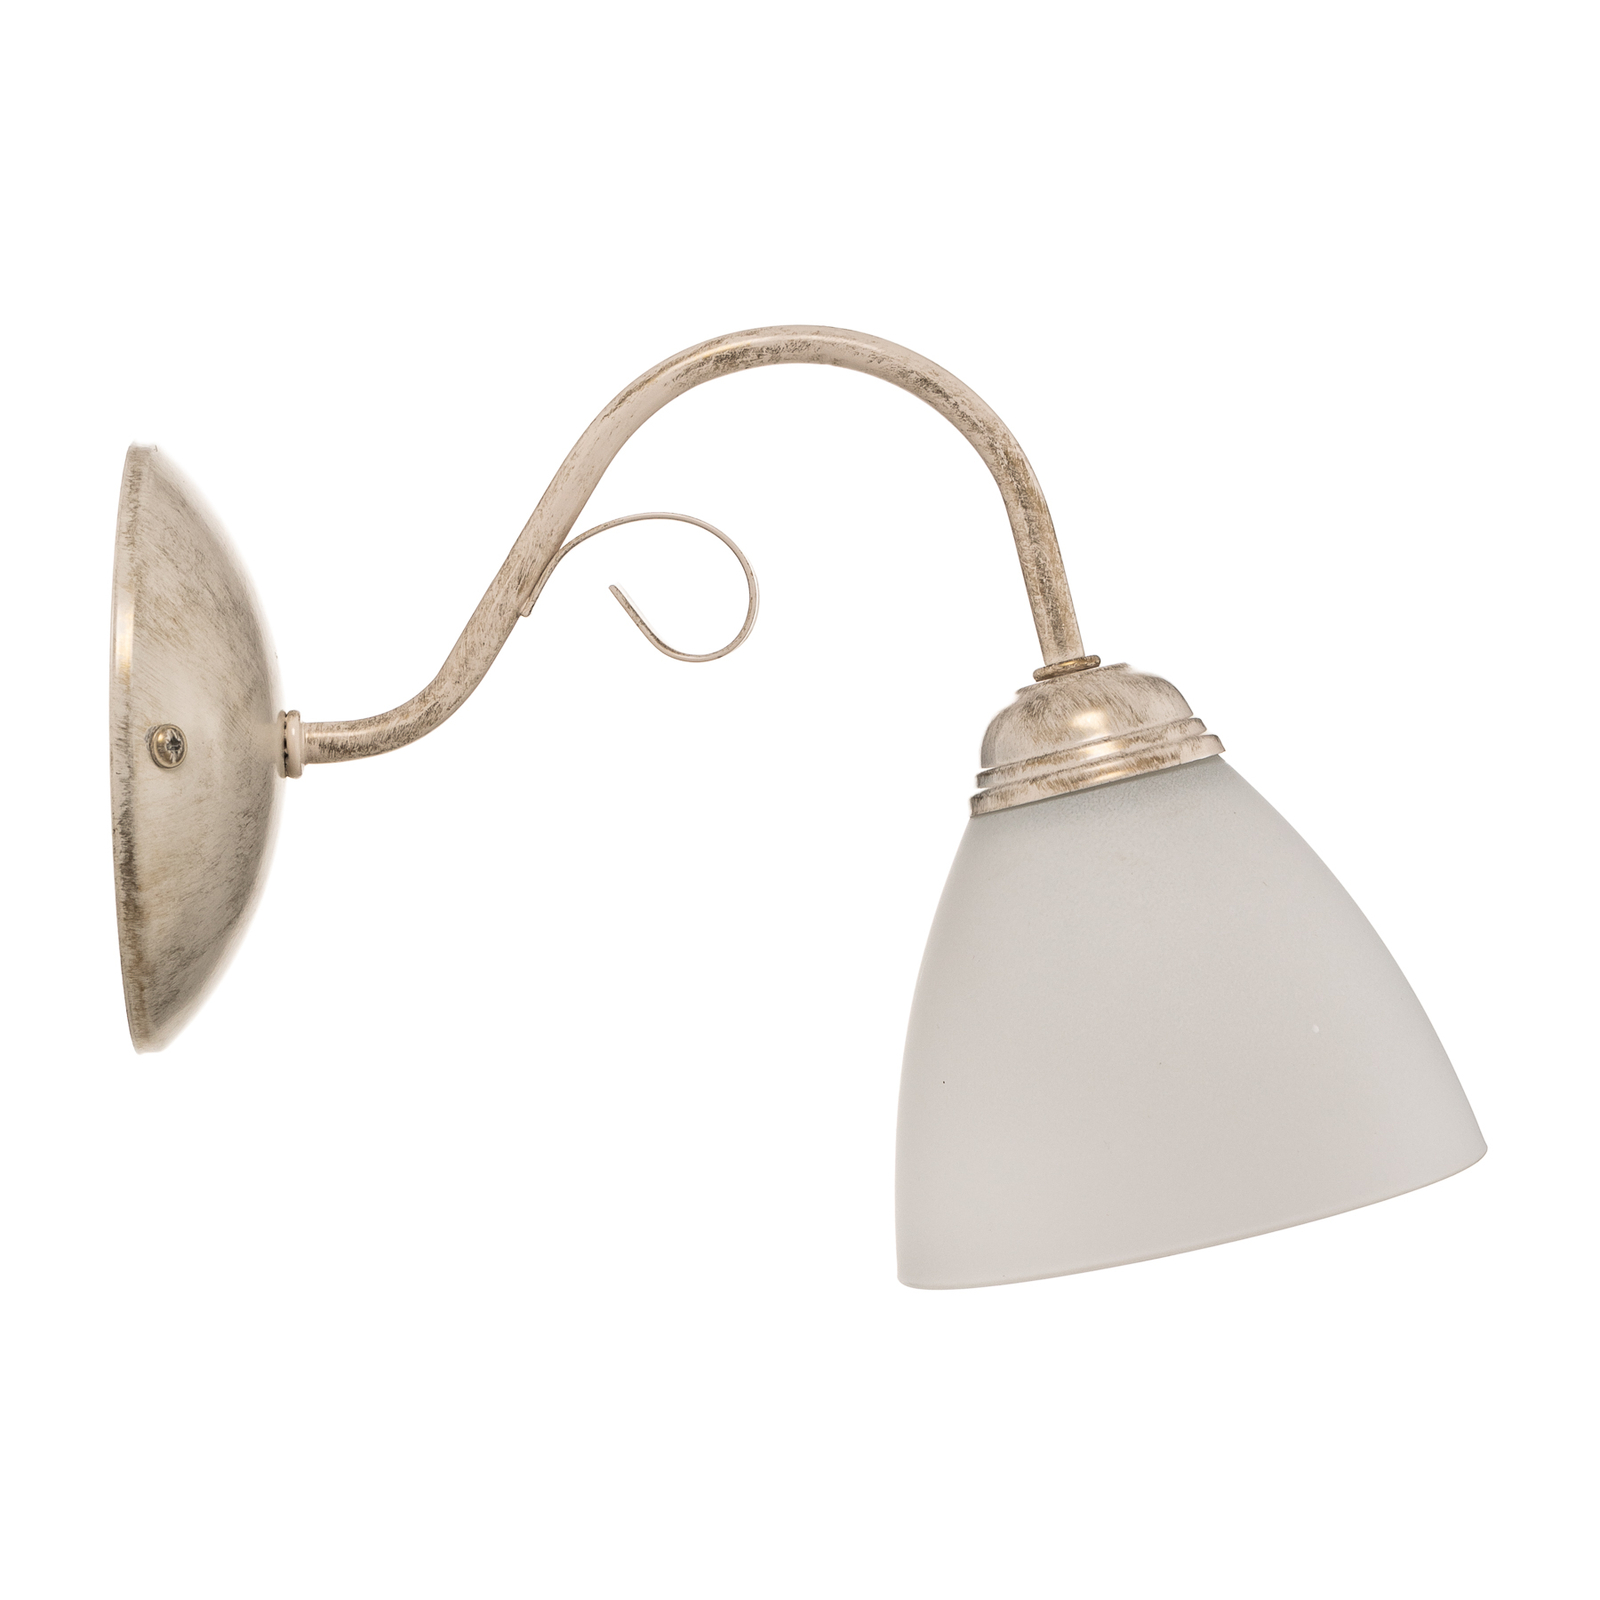 Adoro wall light with a glass lampshade, white